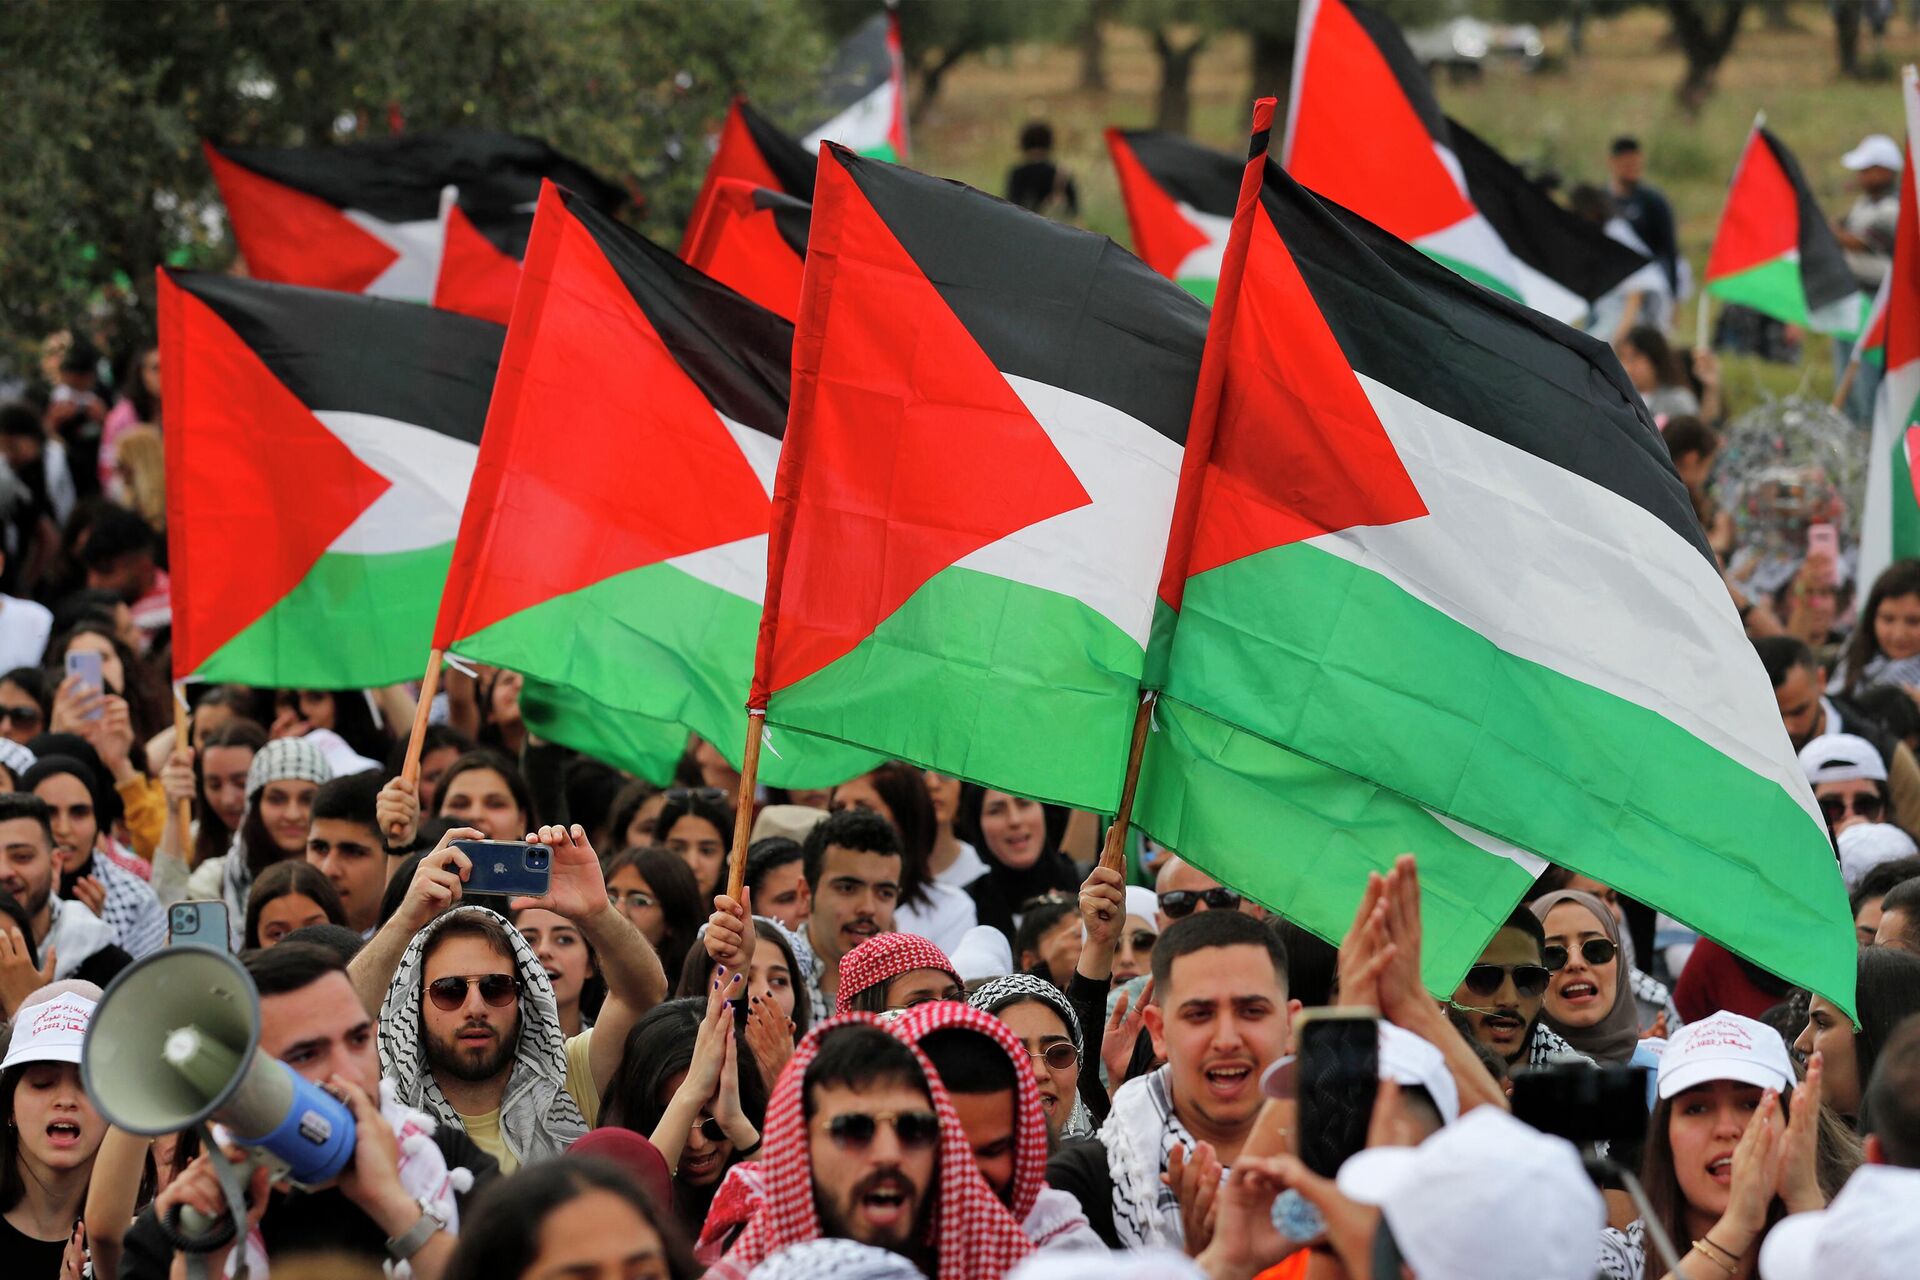 Arab Israeli protestors hold up Palestinian national flags during a demonstration near the city of Sakhnin in northern Israel, on May 5, 2022 ahead of the Palestinian marking of the 74th anniversary of the Nakba, the catastrophe of Israel's creation in 1948. - - Sputnik International, 1920, 22.05.2022